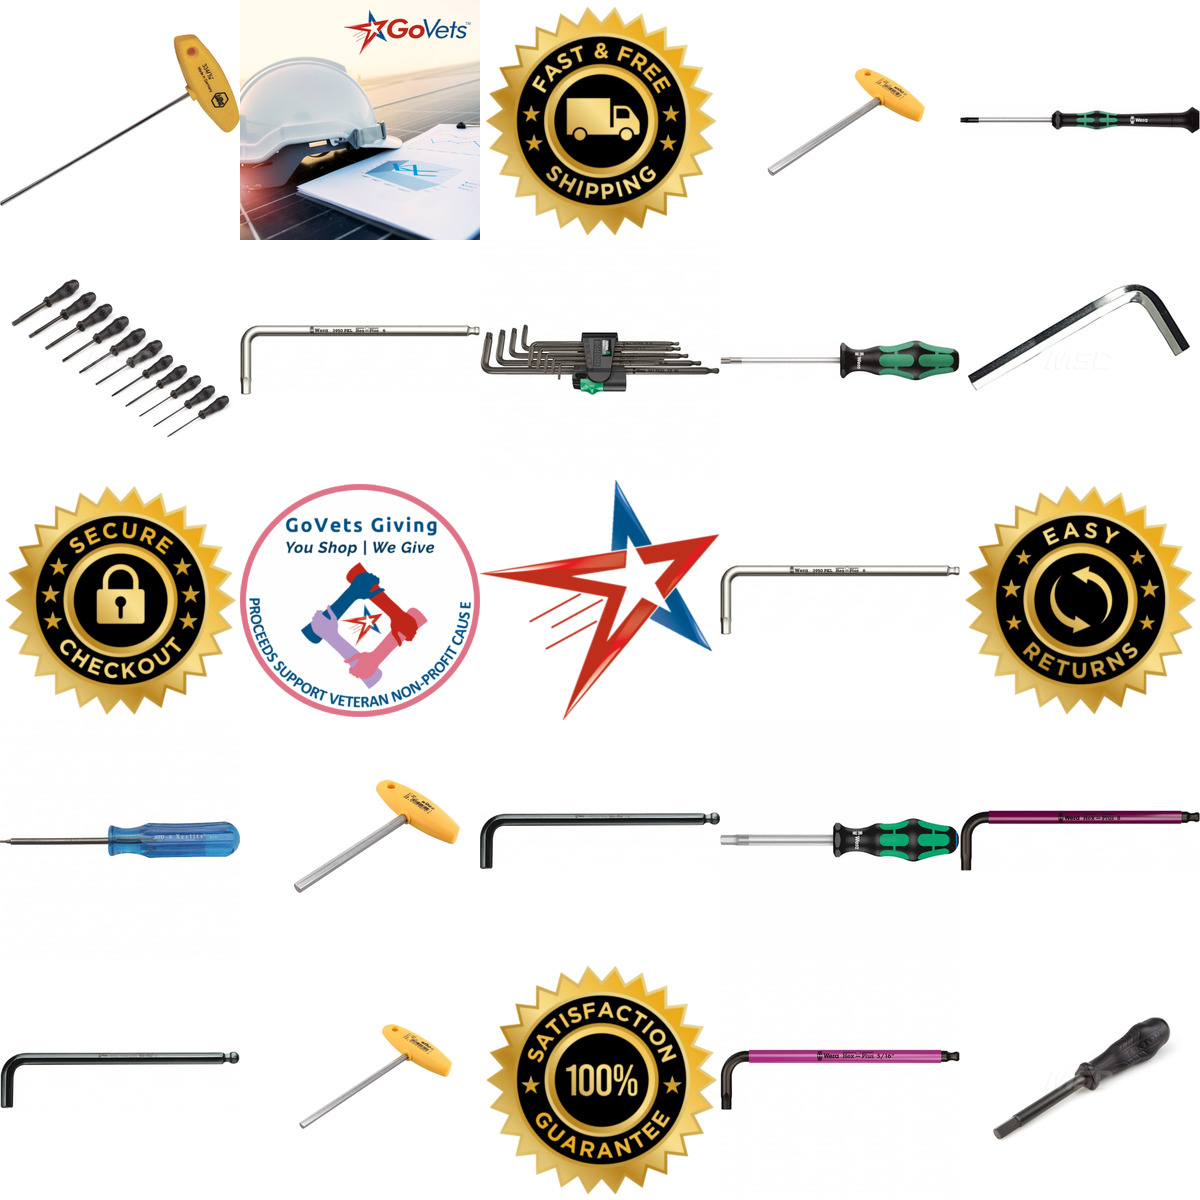 A selection of Bit Screwdrivers and Bits products on GoVets